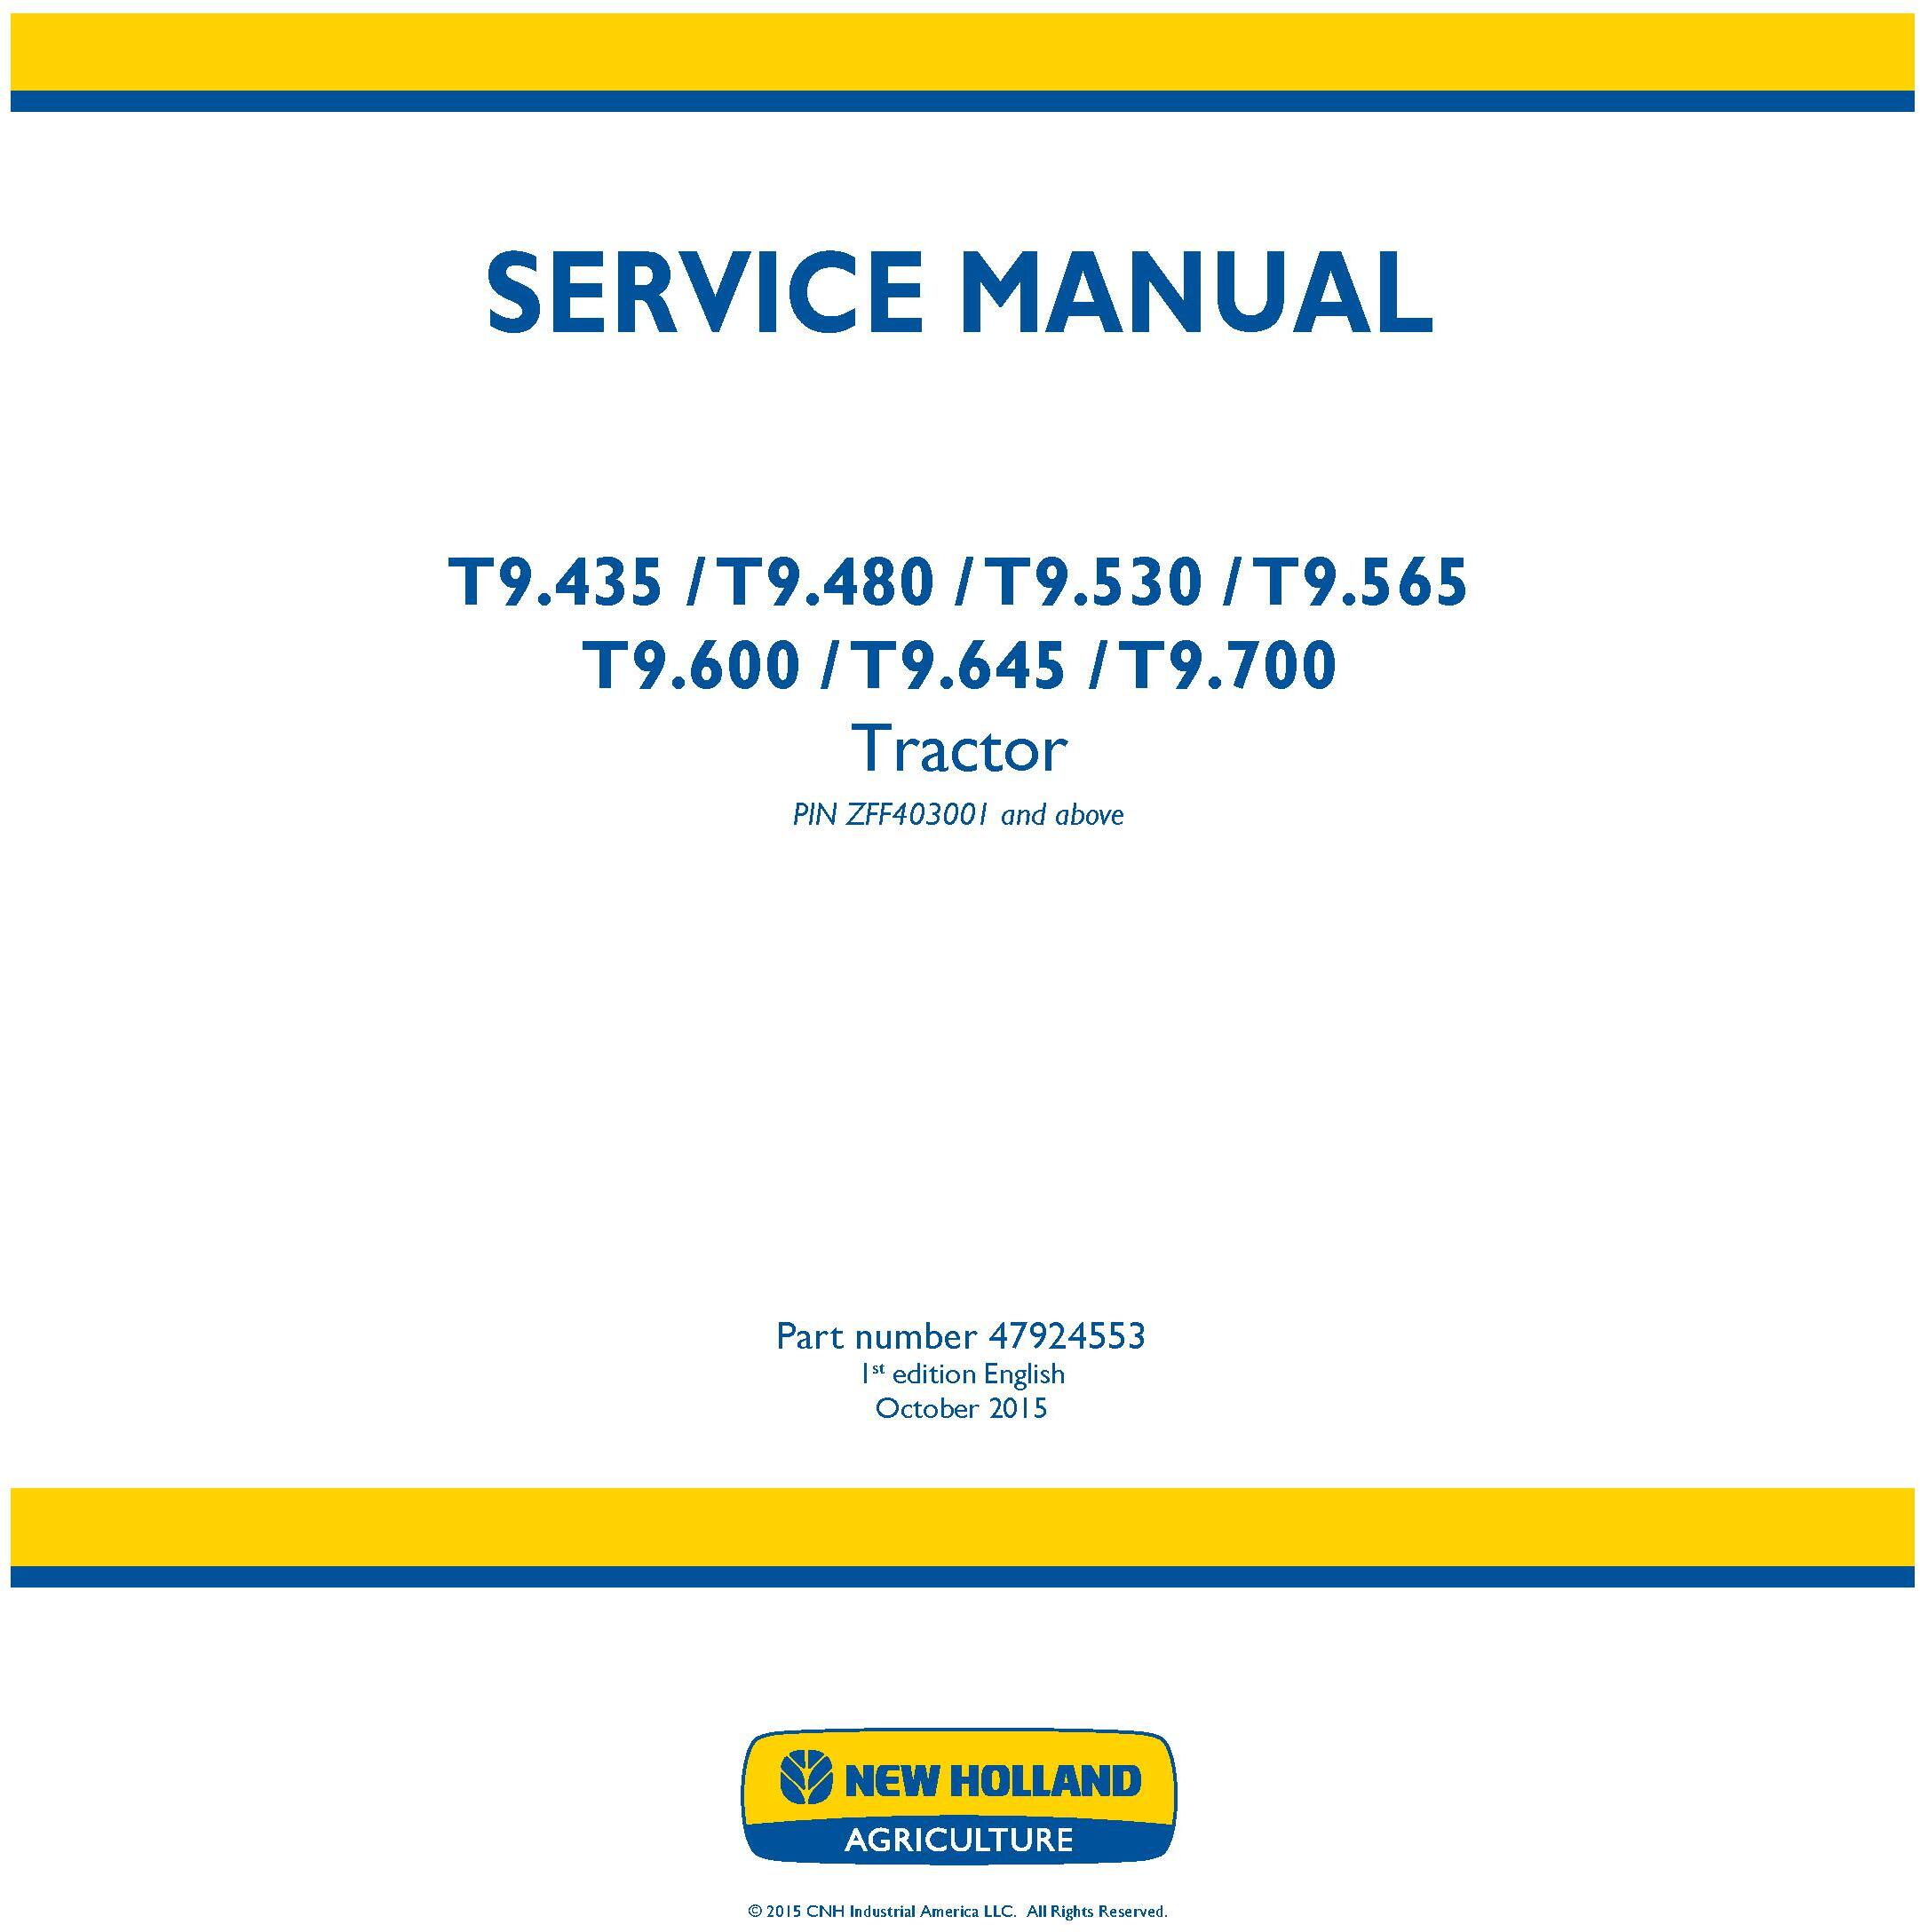 New Holland T9.435, T9.480, T9.530, T9.565, T9.600, T9.645, T9.700 Tractor Service Manual (Europe) - 19461